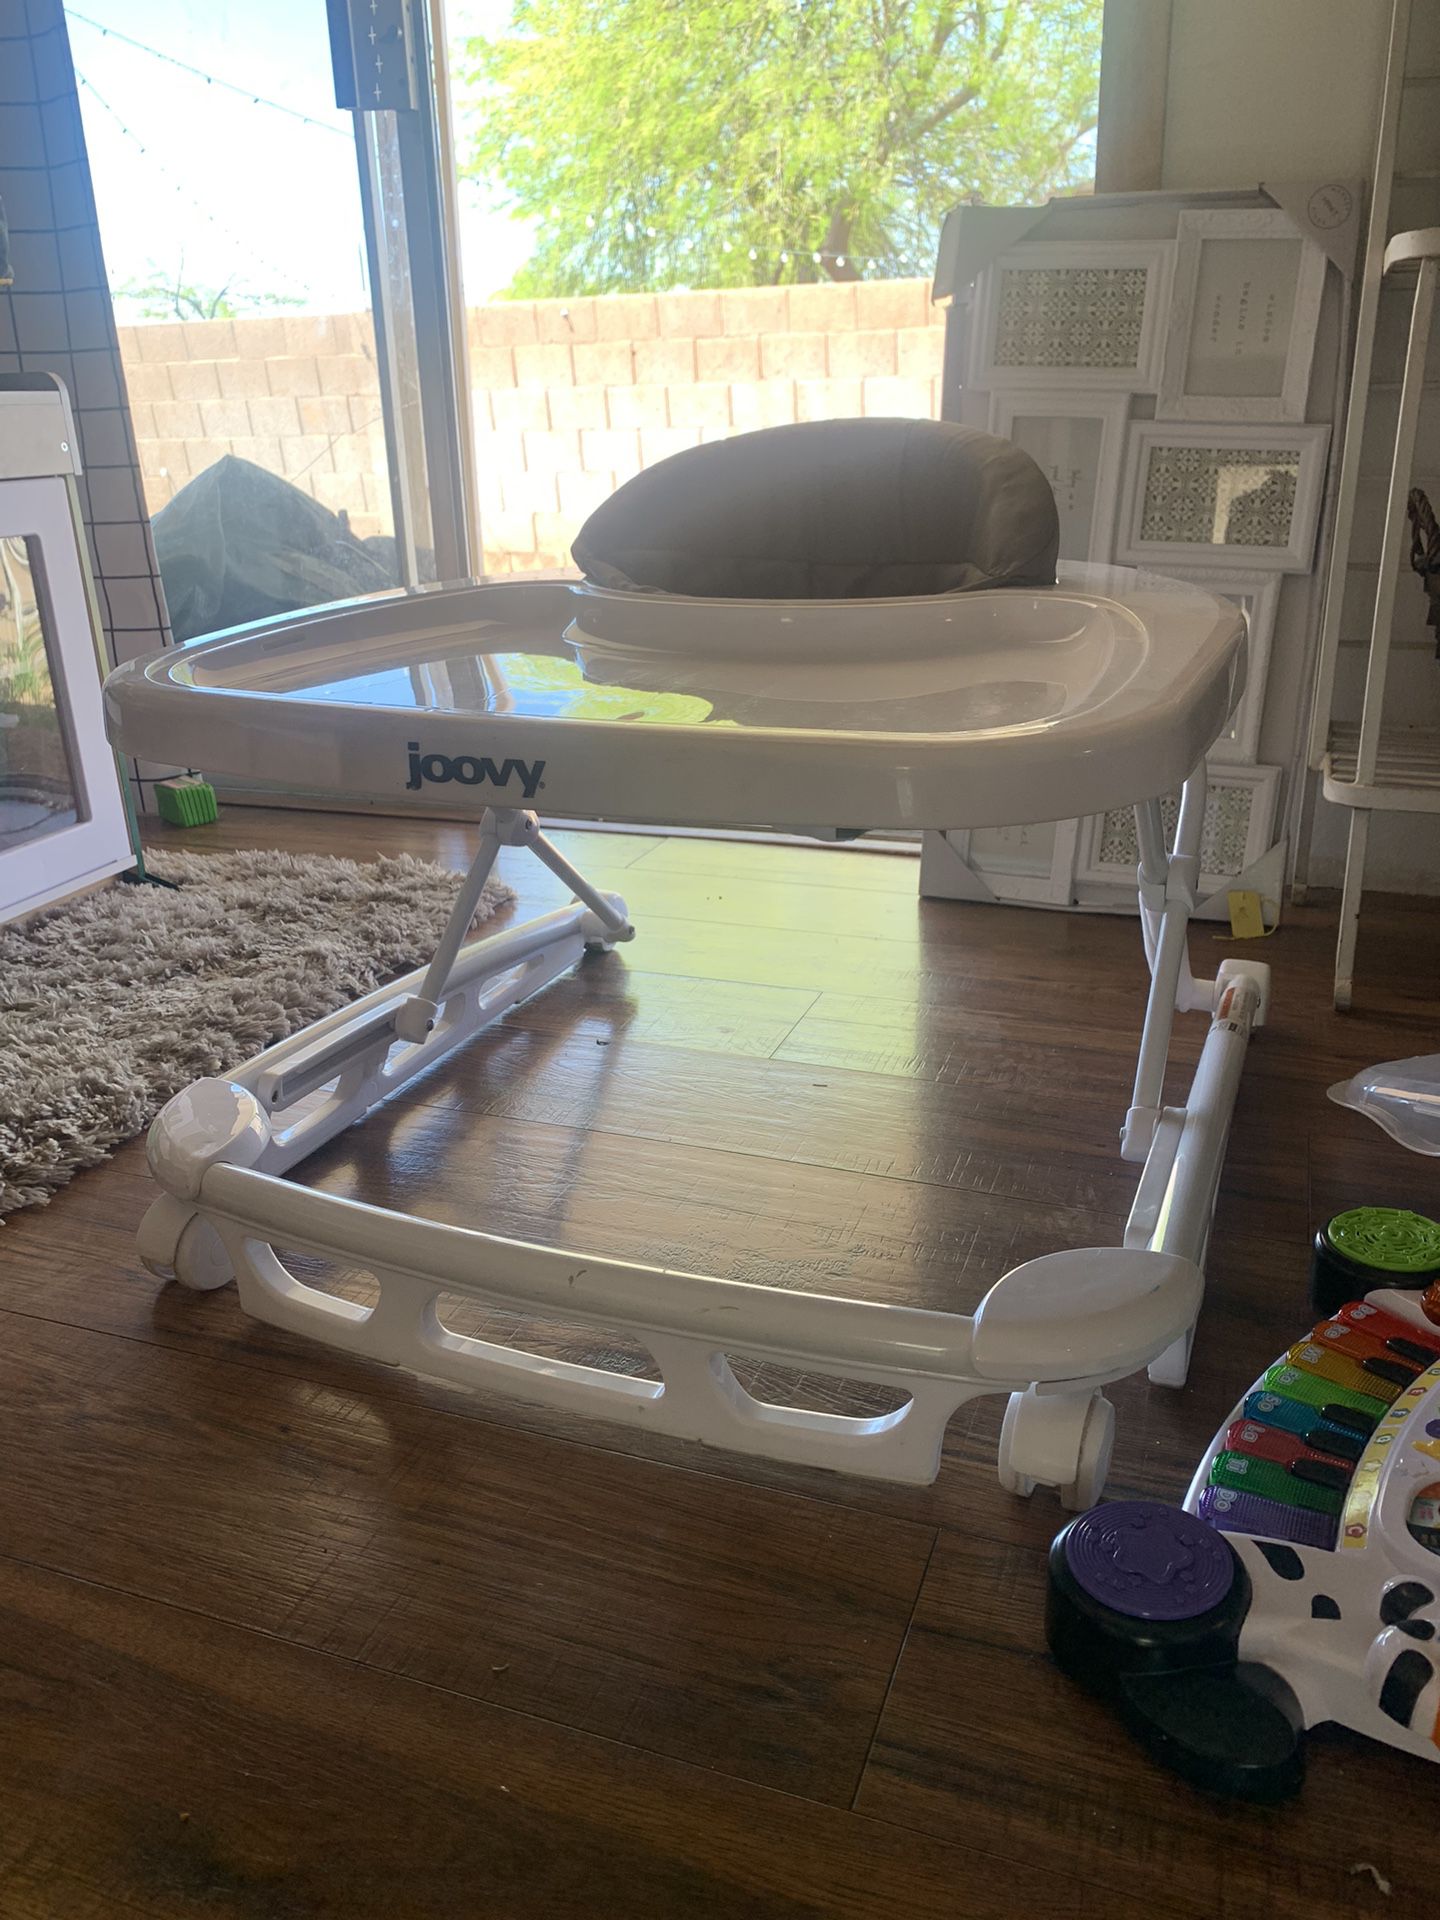 Joovy Baby Walker and Baby Toys